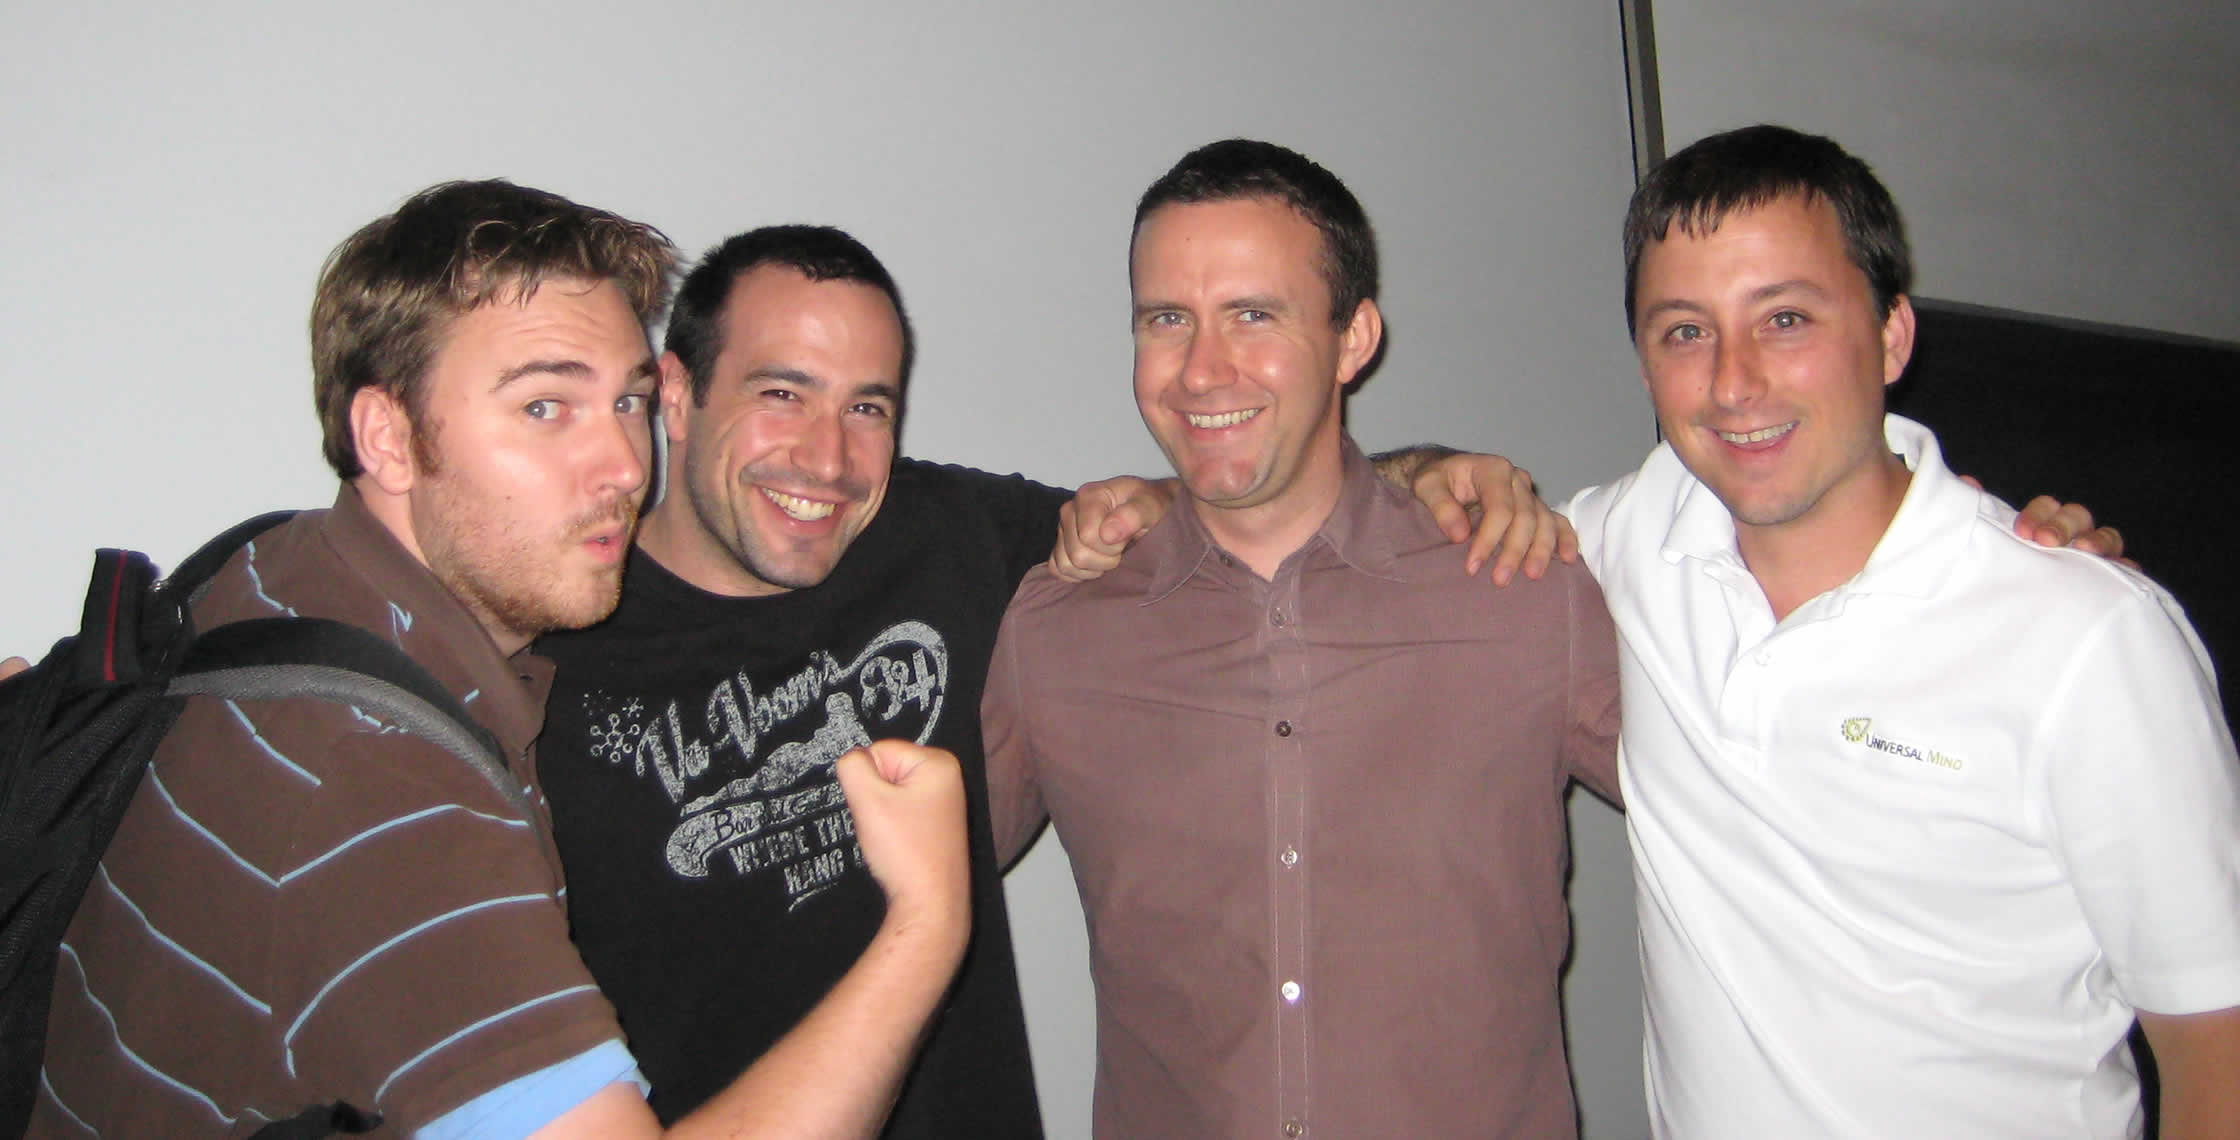 Ben Nadel at the New York ColdFusion User Group (Jul. 2008) with: Simon Free, Peter Bell, and Dan Wilson